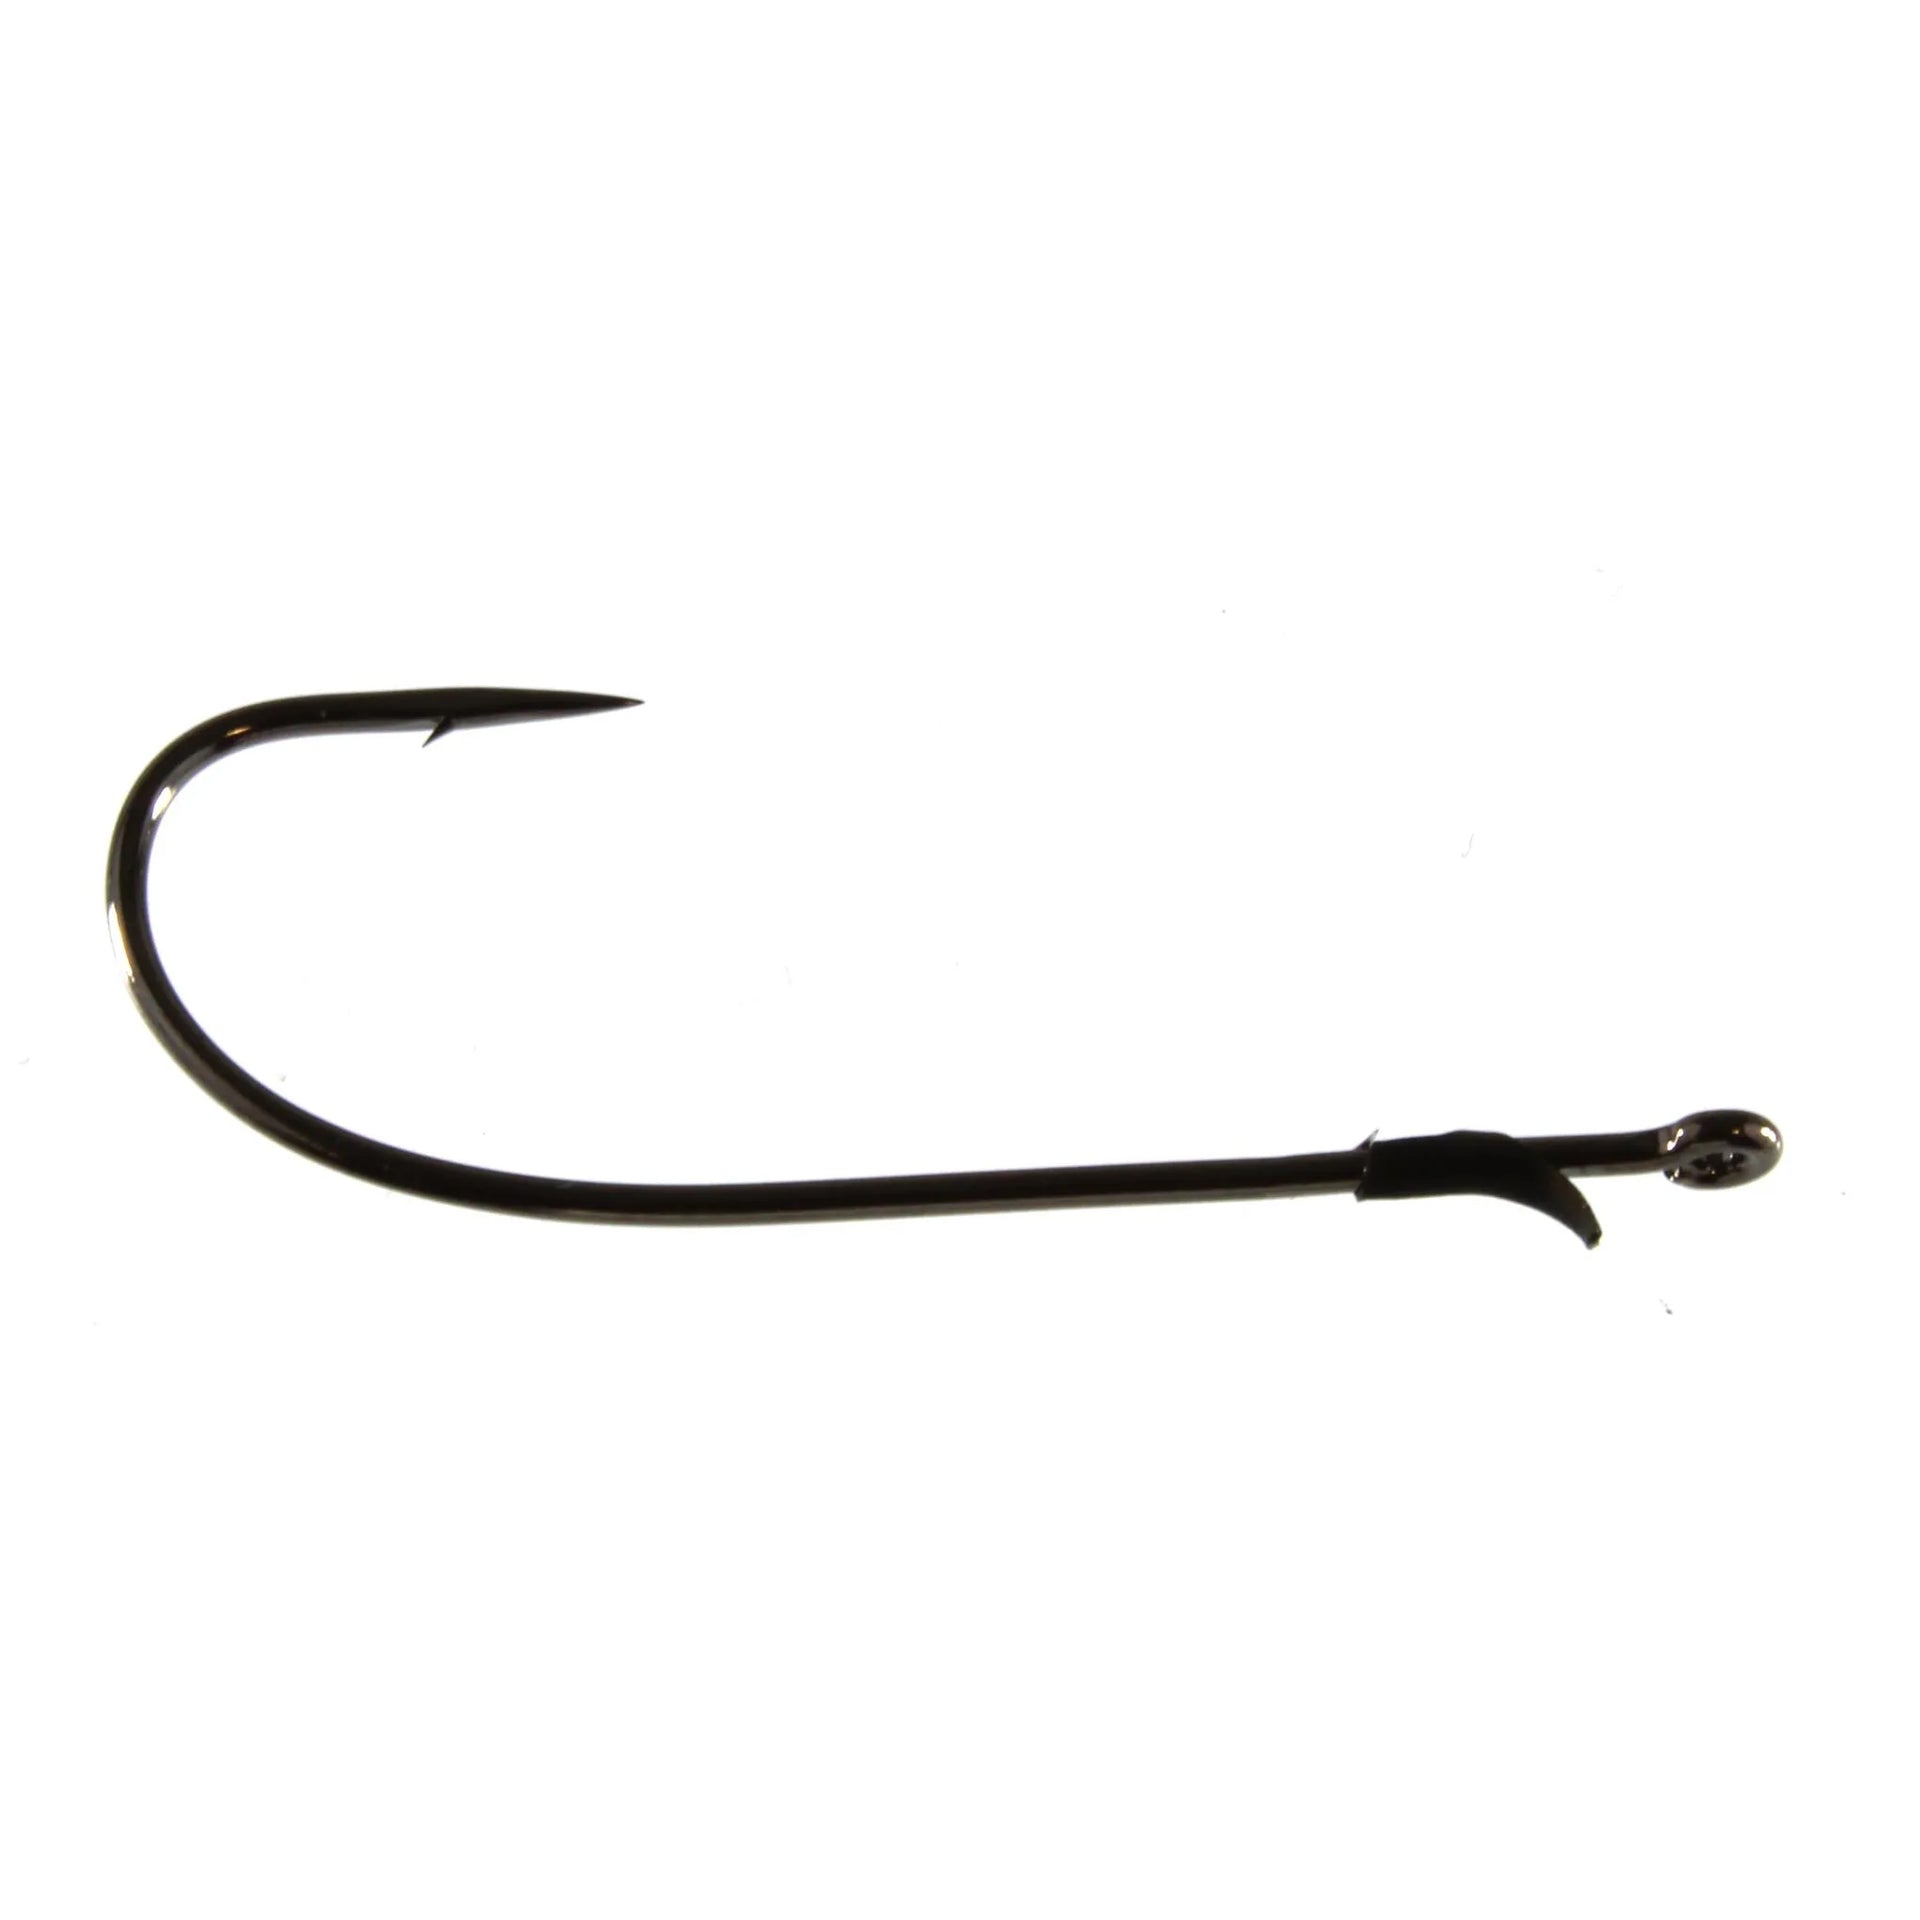 Roboworm Rebarb Hooks, 1/0 by Roboworm, Sports & Outdoors 